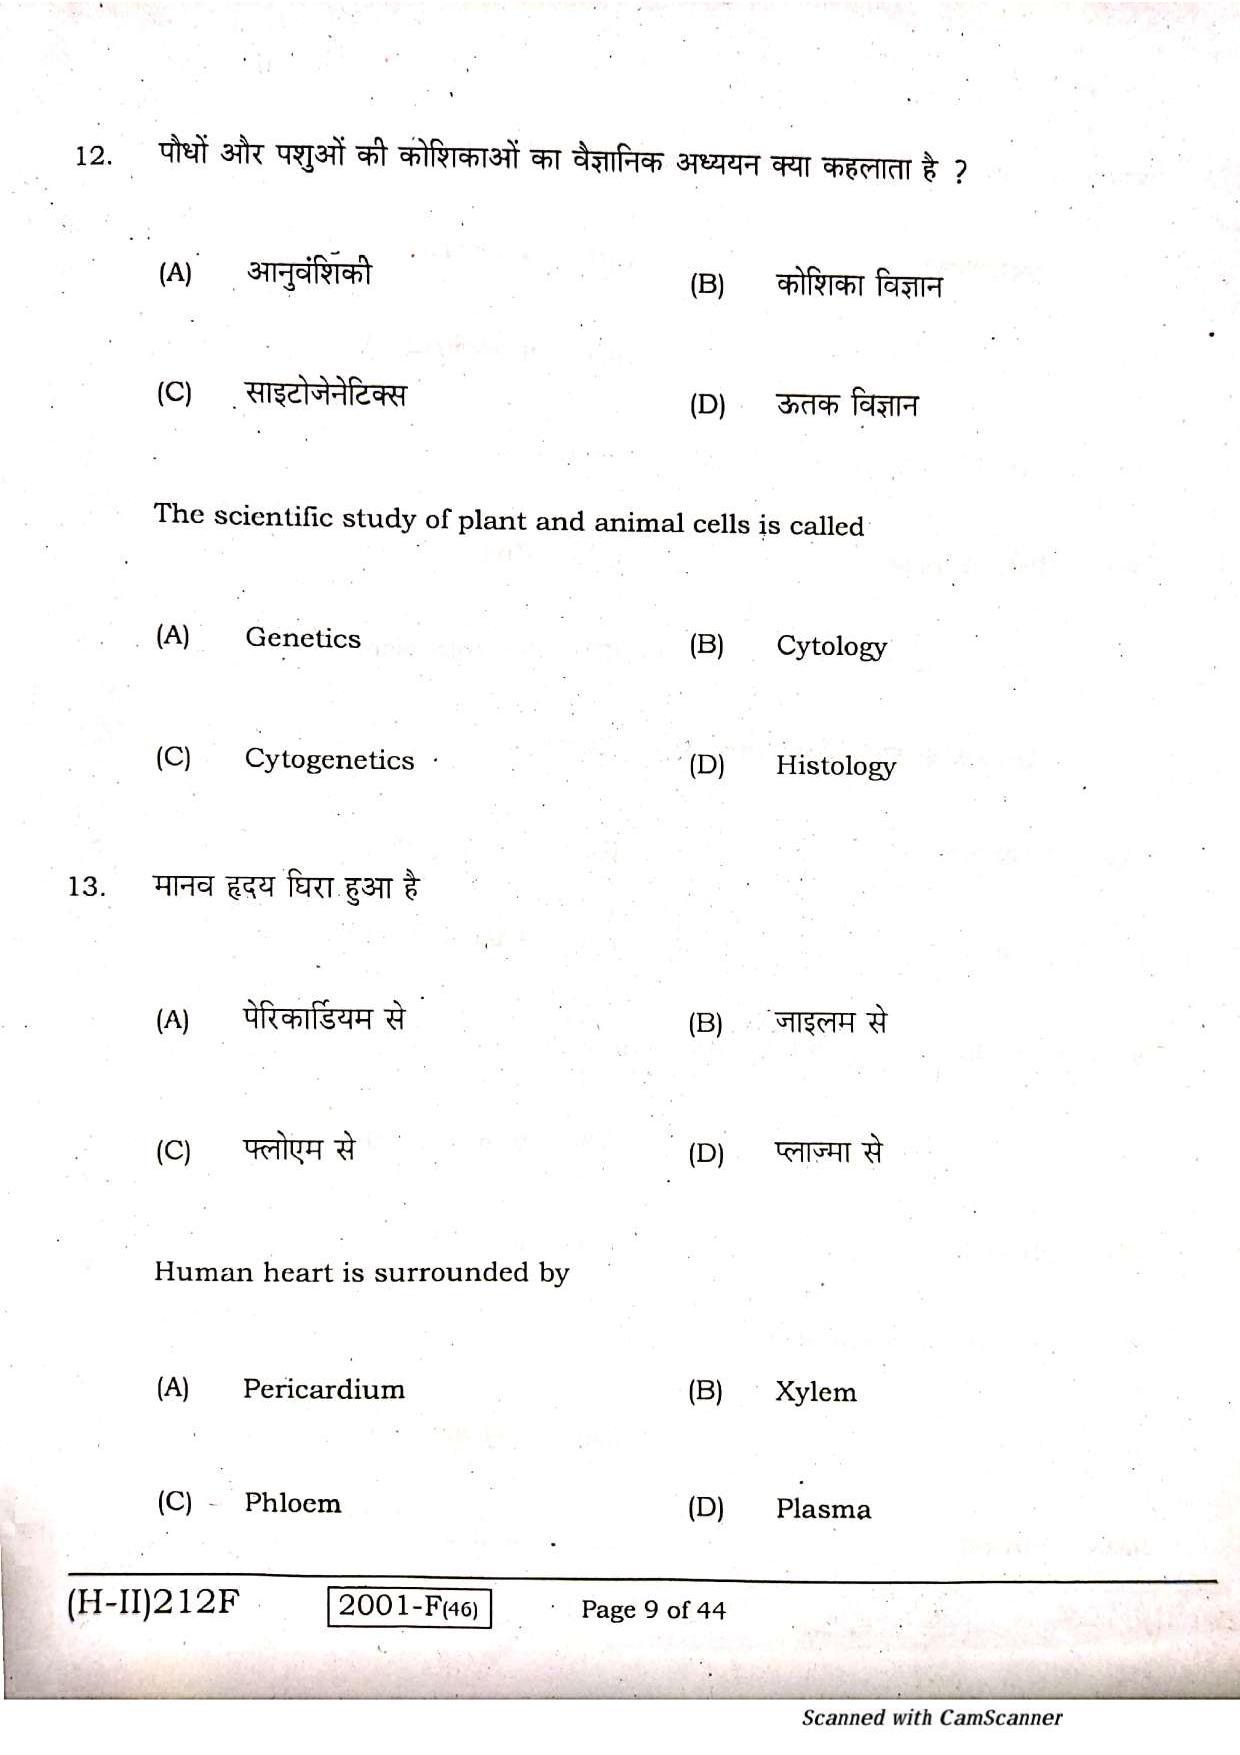 Bihar Board Class 10 Science 2021 (2nd Sitting) Question Paper - Page 7